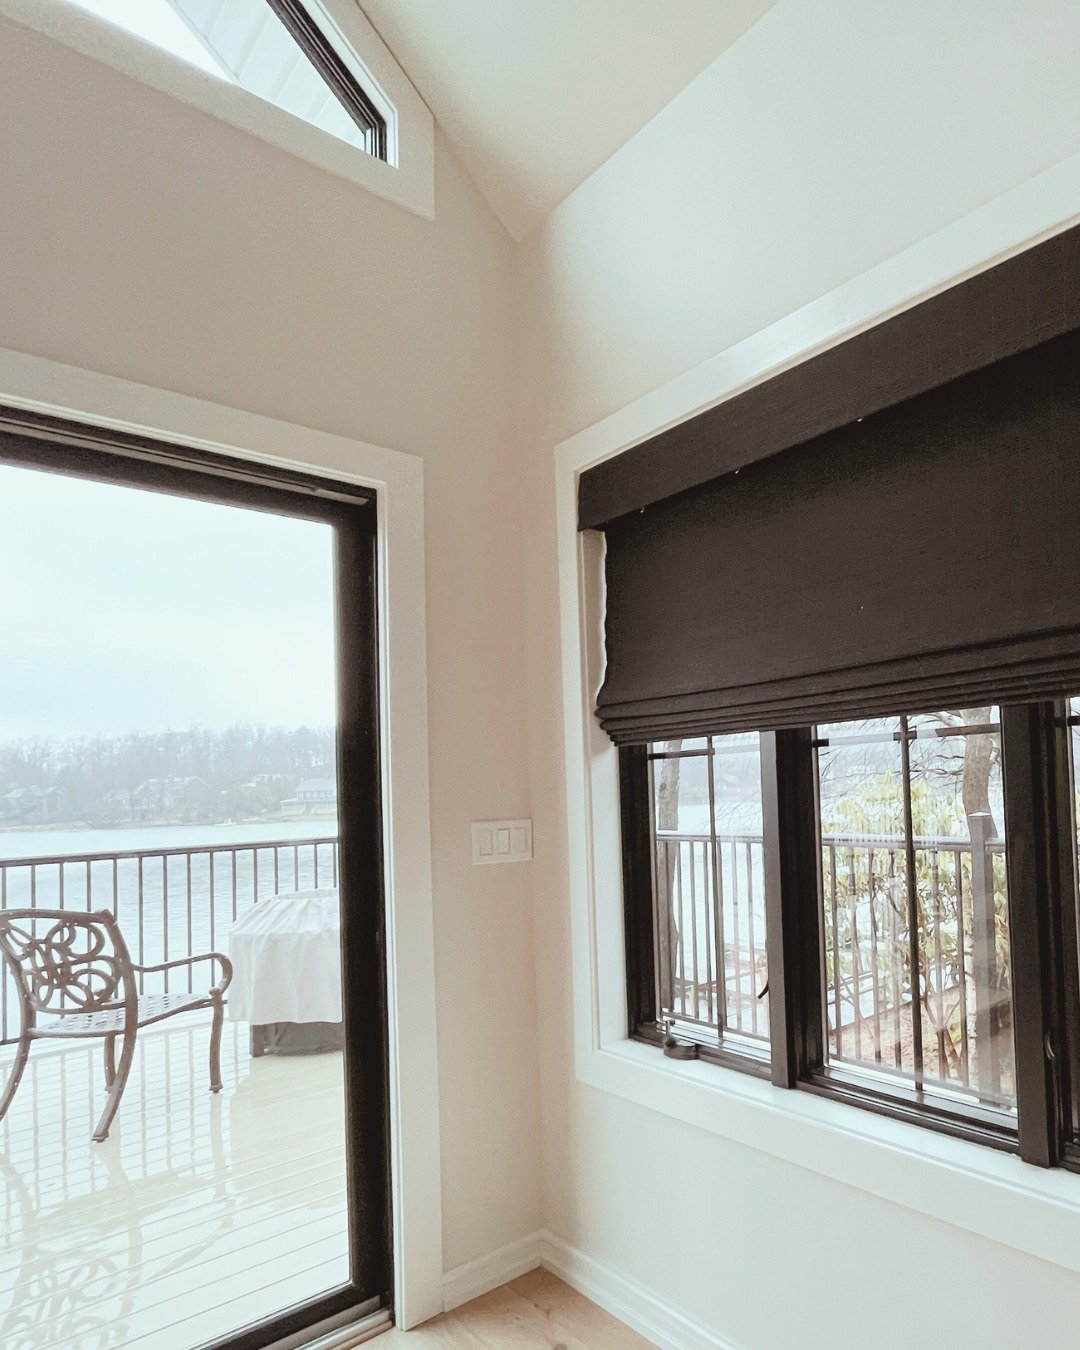 Cordless lift. Blackout or privacy linings. Inside mount. For 13 rooms in a beautiful Lake Harmony home. 

These classic Roman shades offer a clean, modern aesthetic for function and beauty. And even though these may seem like simple window treatment